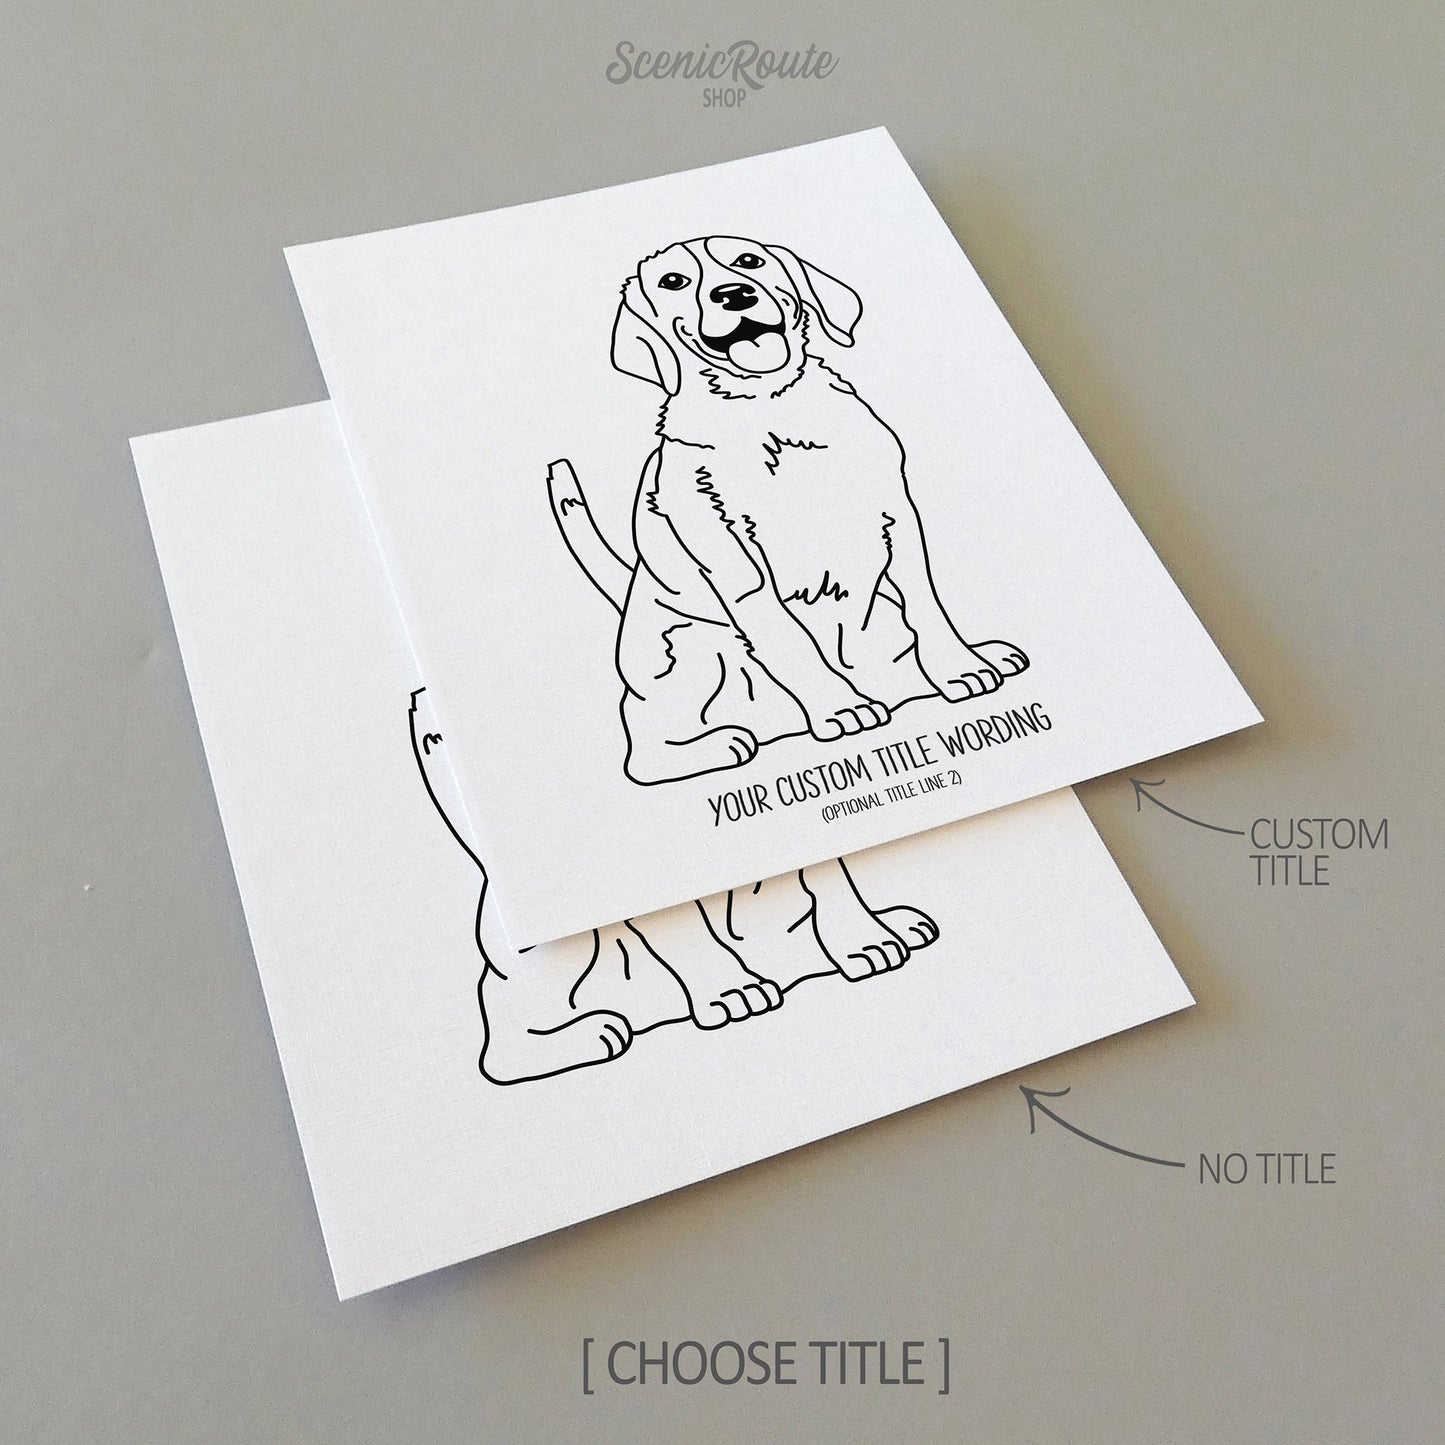 Two drawings of a Beagle dog on white linen paper with a gray background.  Pieces are shown with “No Title” and “Custom Title” options to illustrate the available art print options.